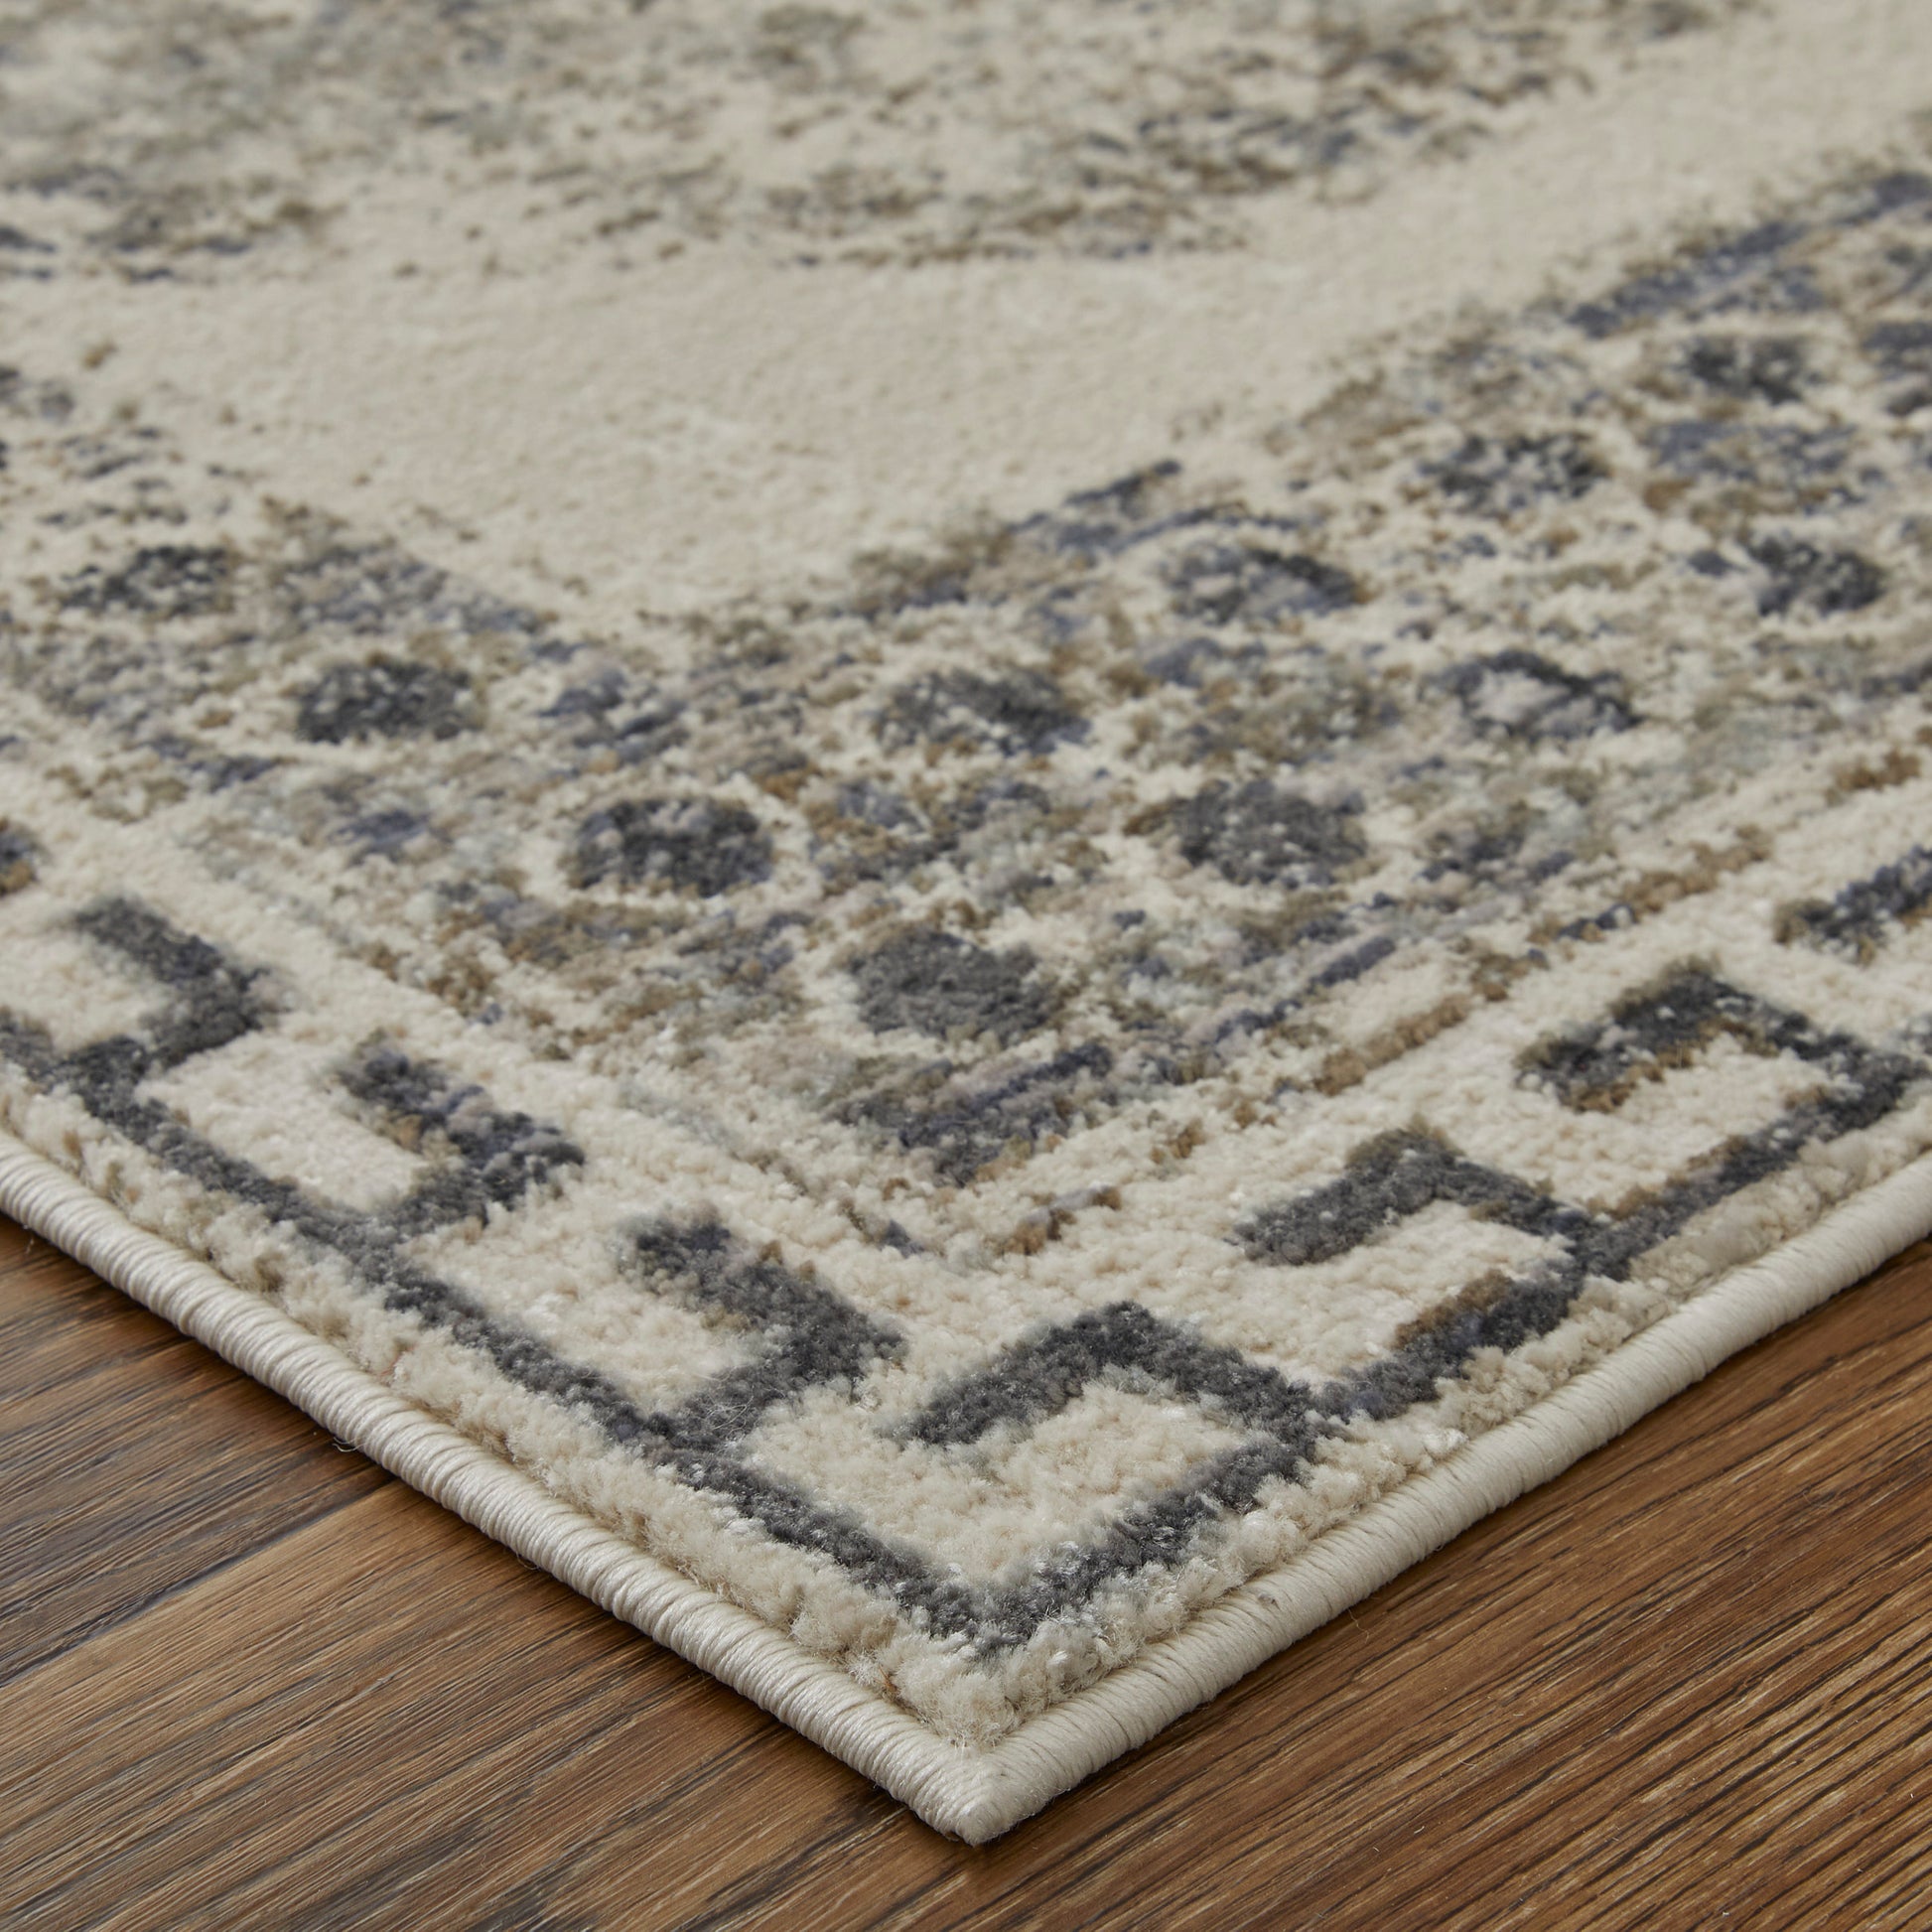 Feizy Kano 86439Ljf Ivory/Taupe/Gray Area Rug